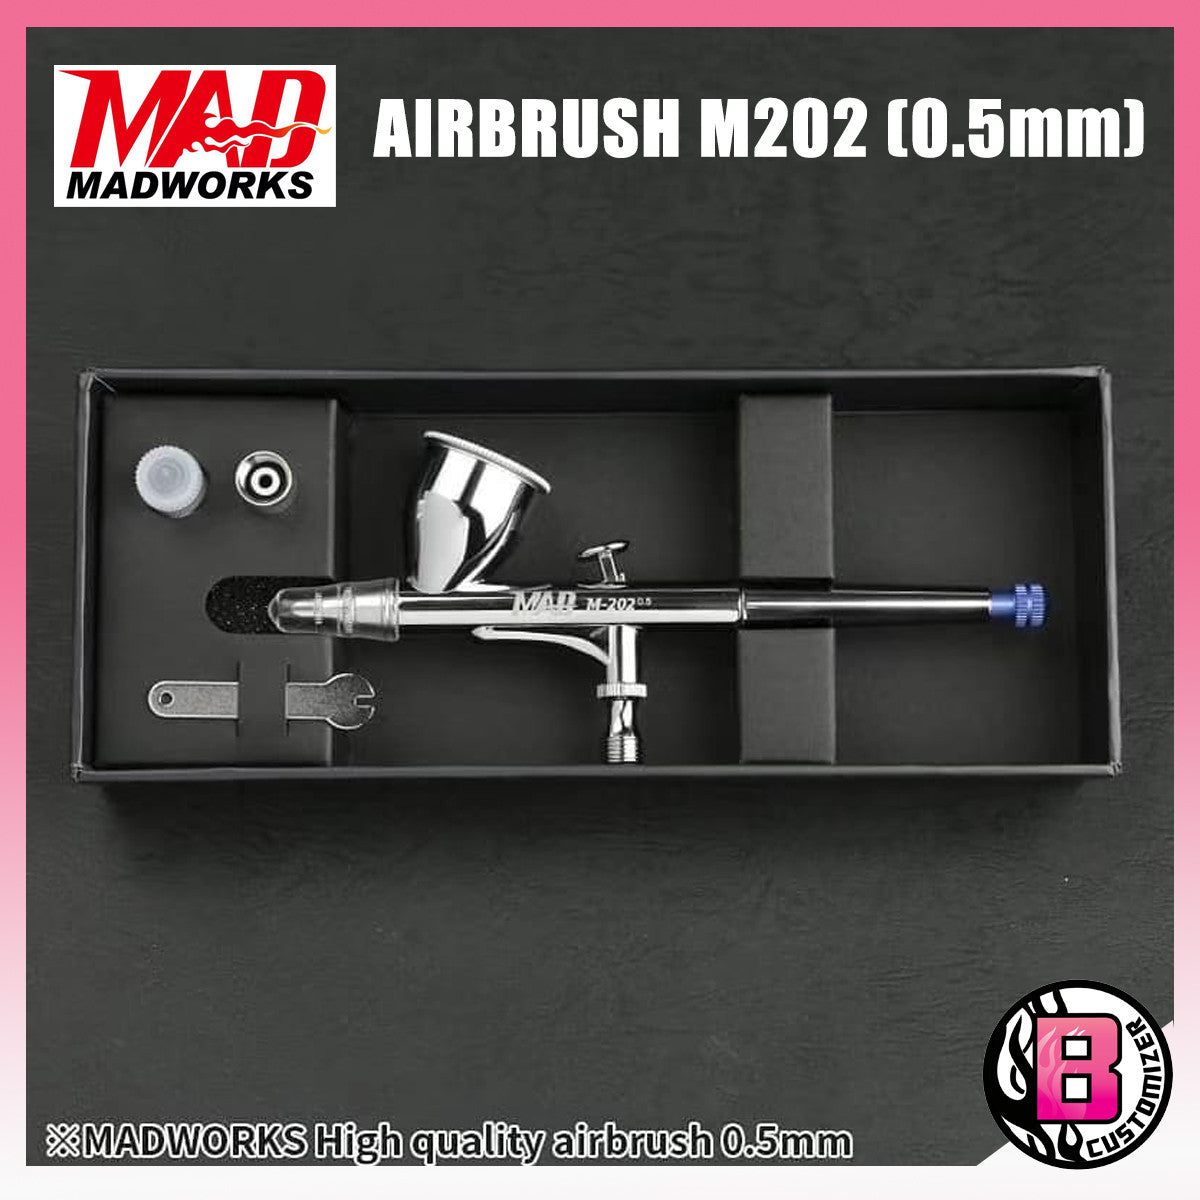 Madworks High Quality Airbrush M202 (0.5mm nozzle)